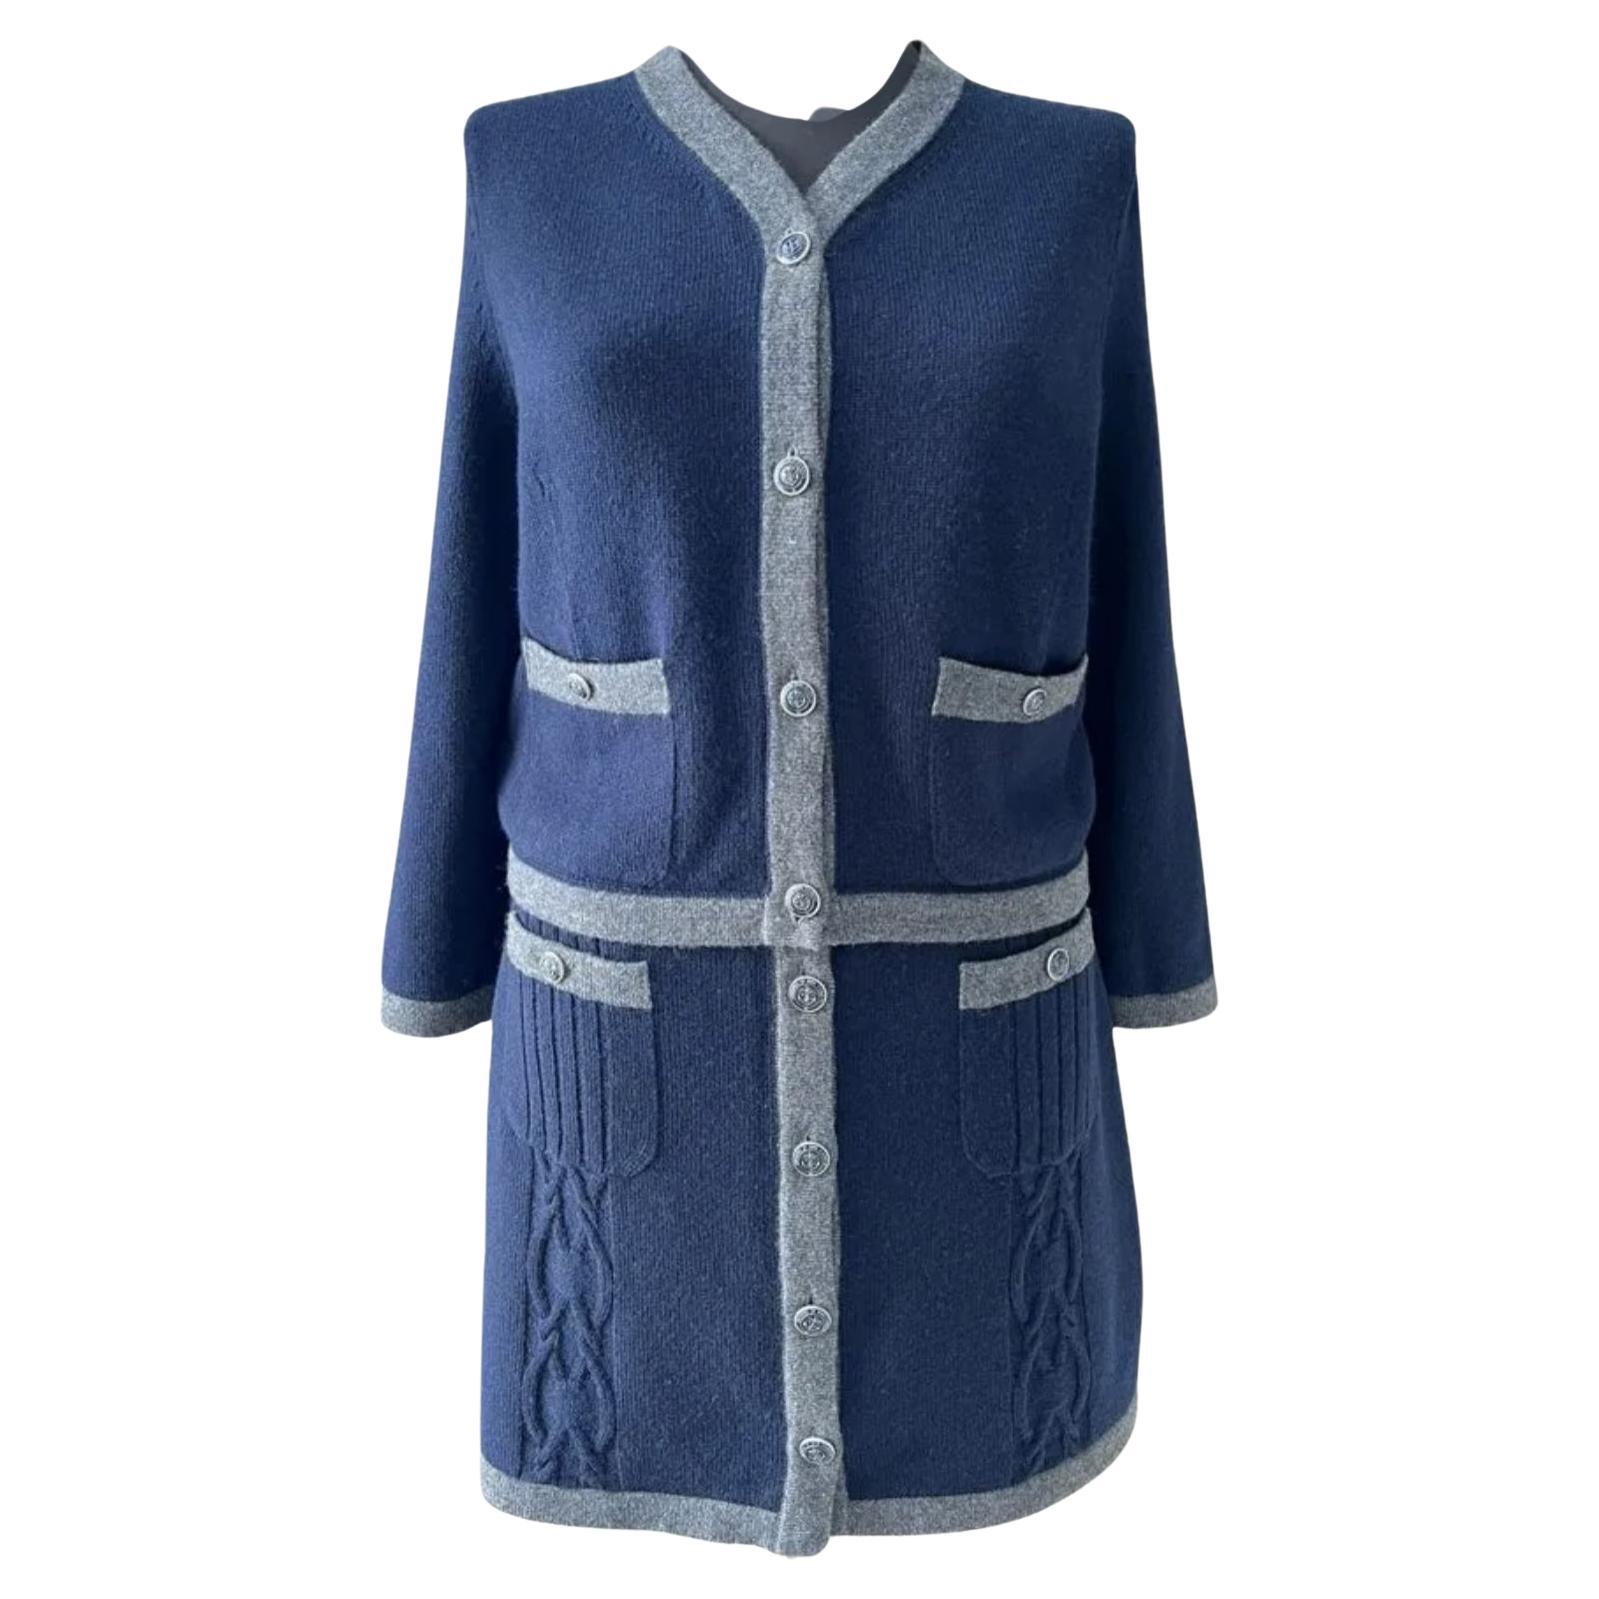 Chanel Sophia Coppola Style New Cashmere Suit For Sale